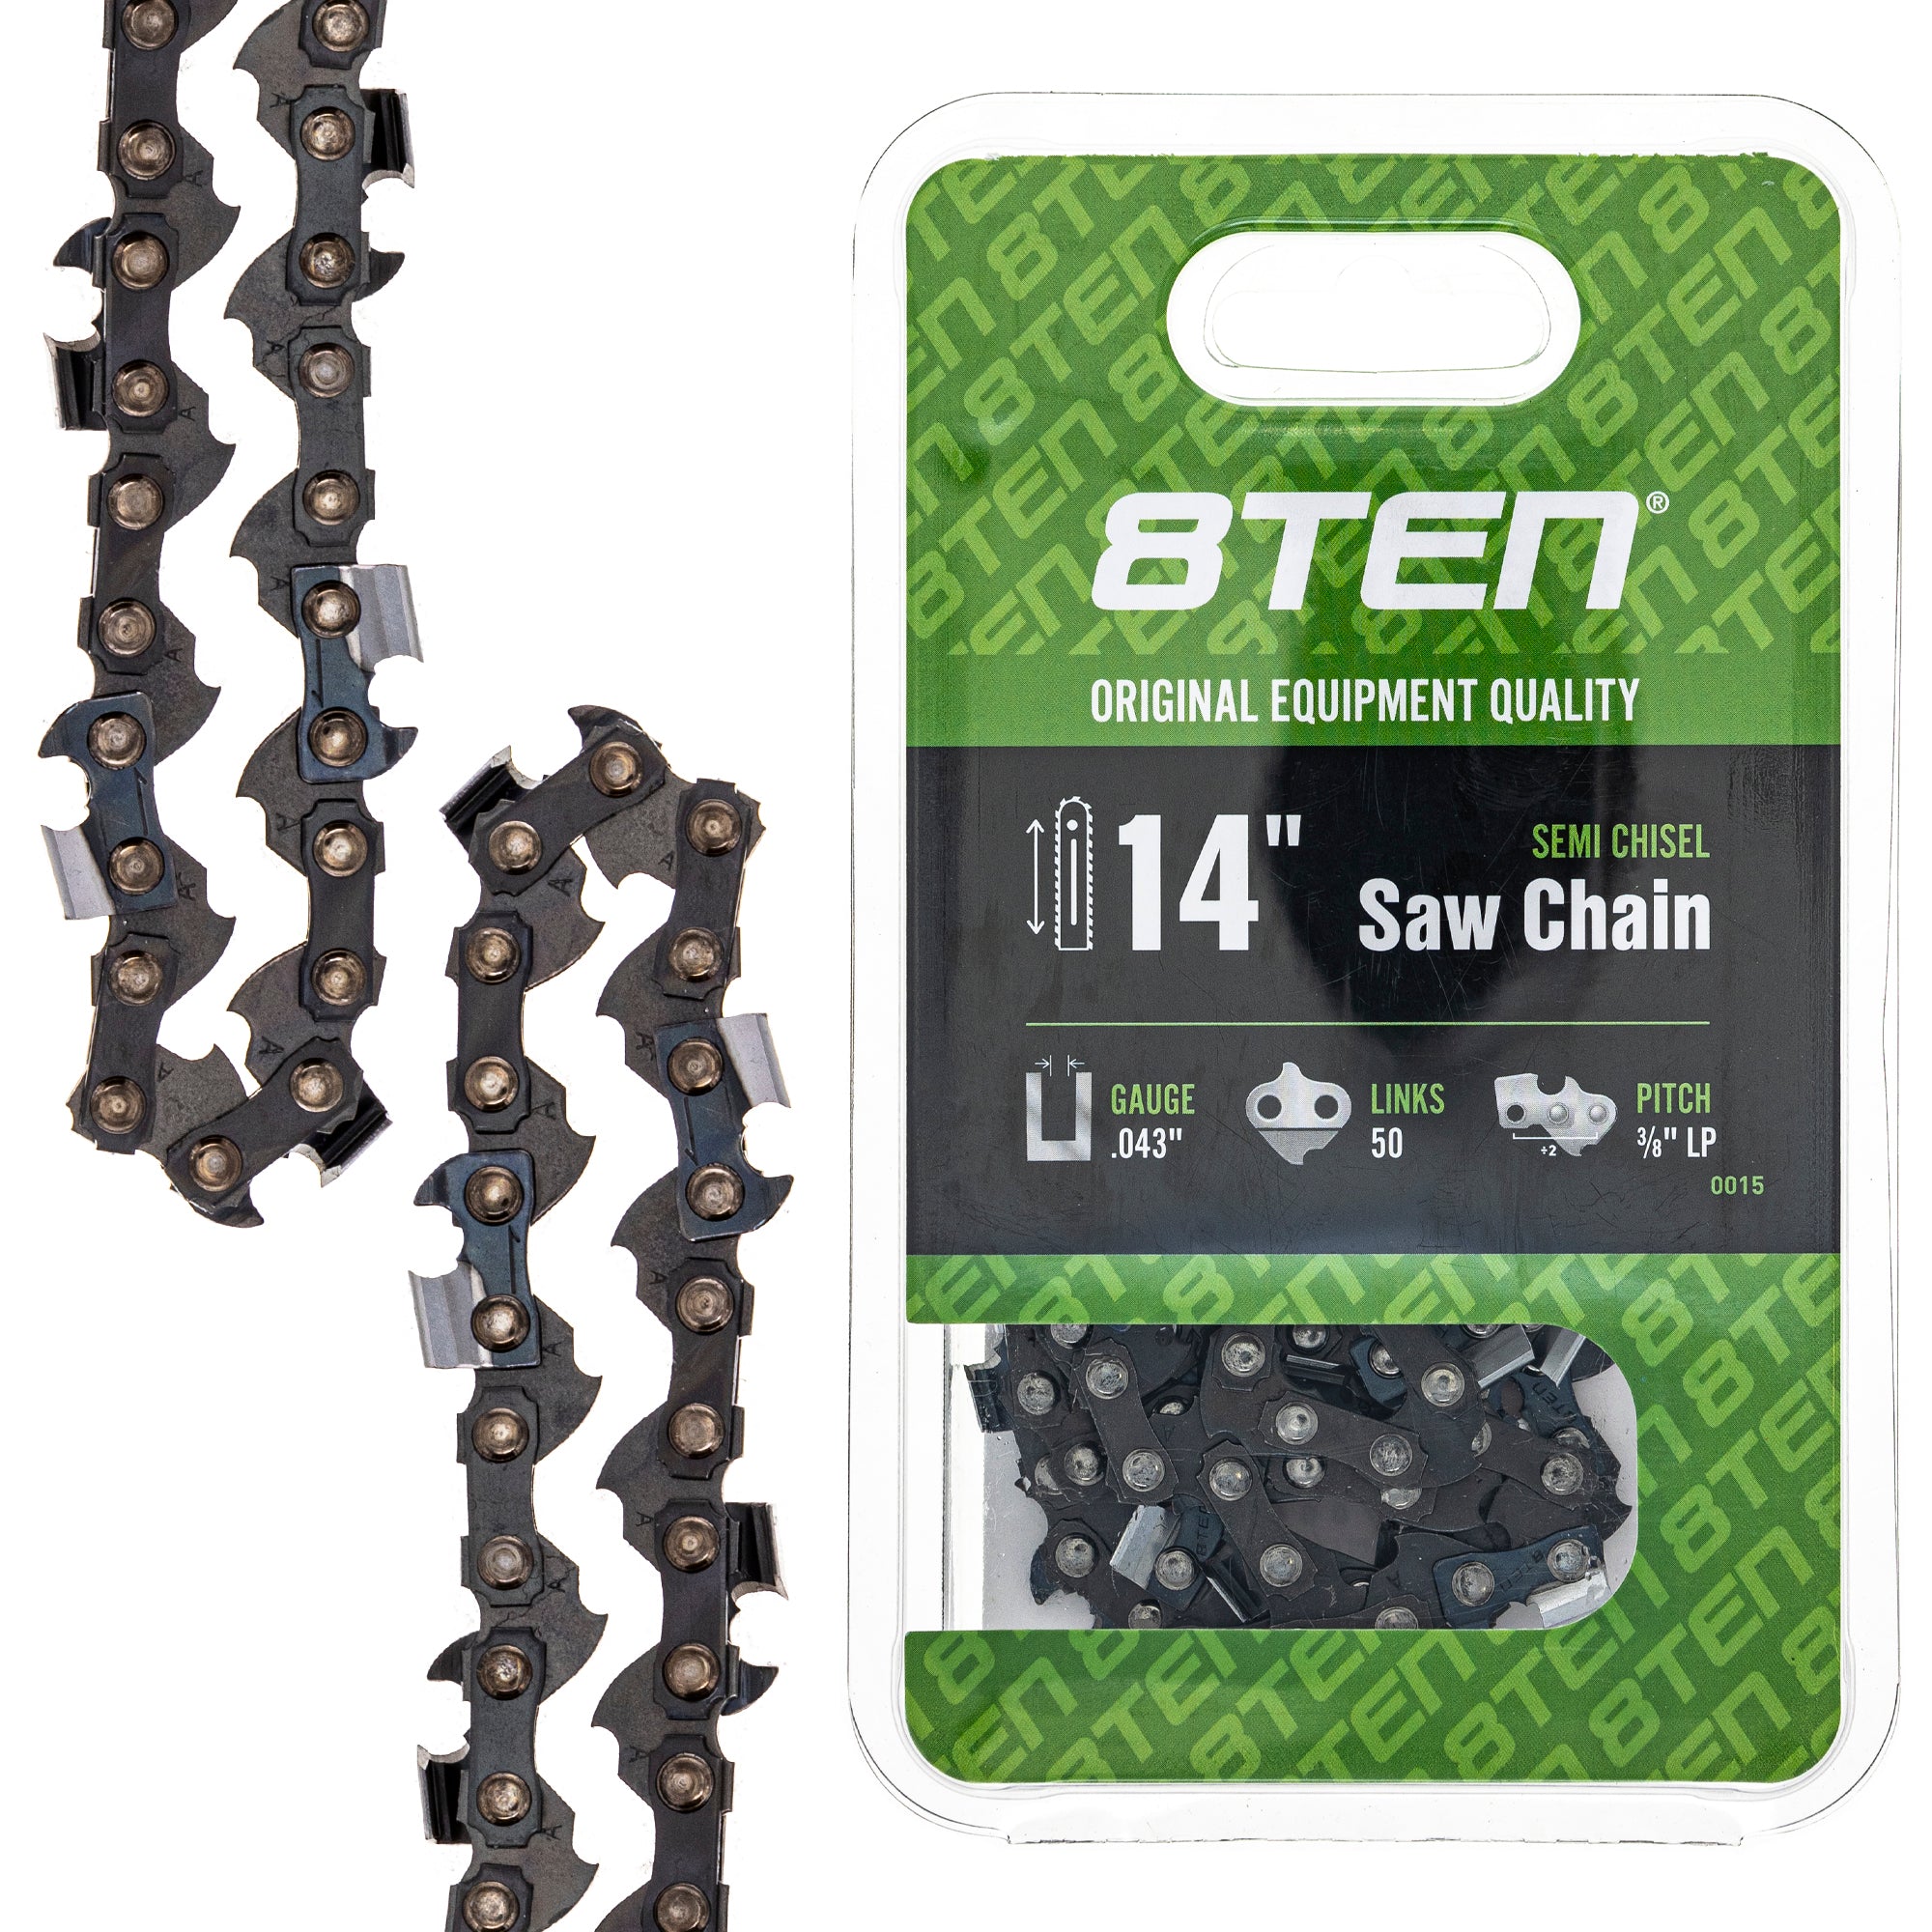 8TEN 810-CCC2237H Chain for zOTHER Stens Oregon Carlton MSE MSA MS